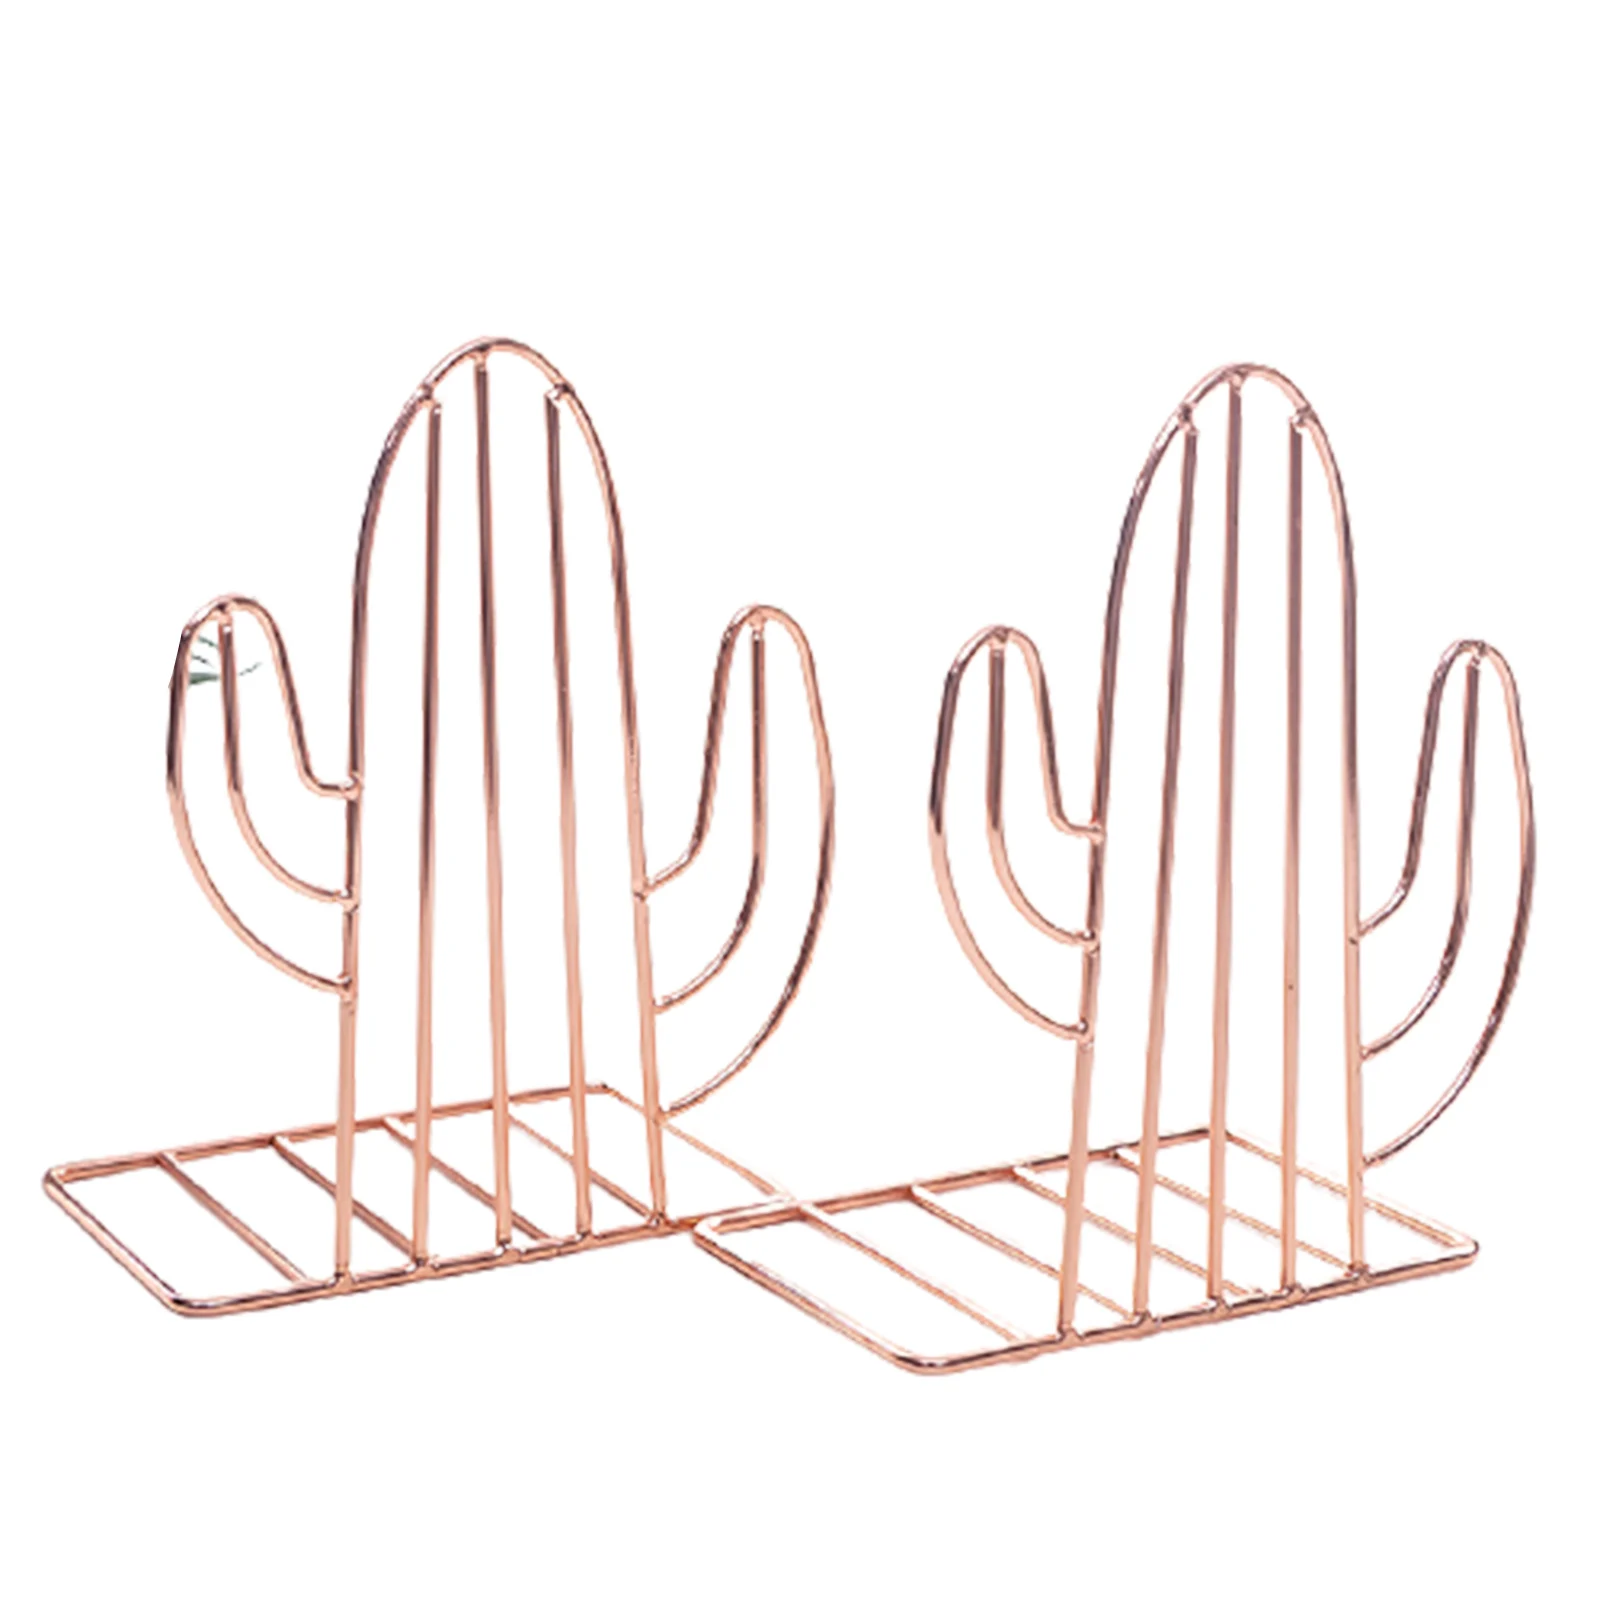 

2PCS/Pair Creative Cactus Plant Shaped Metal Bookends Book Support Stand Desk Organizer Storage Book Holder Shelf